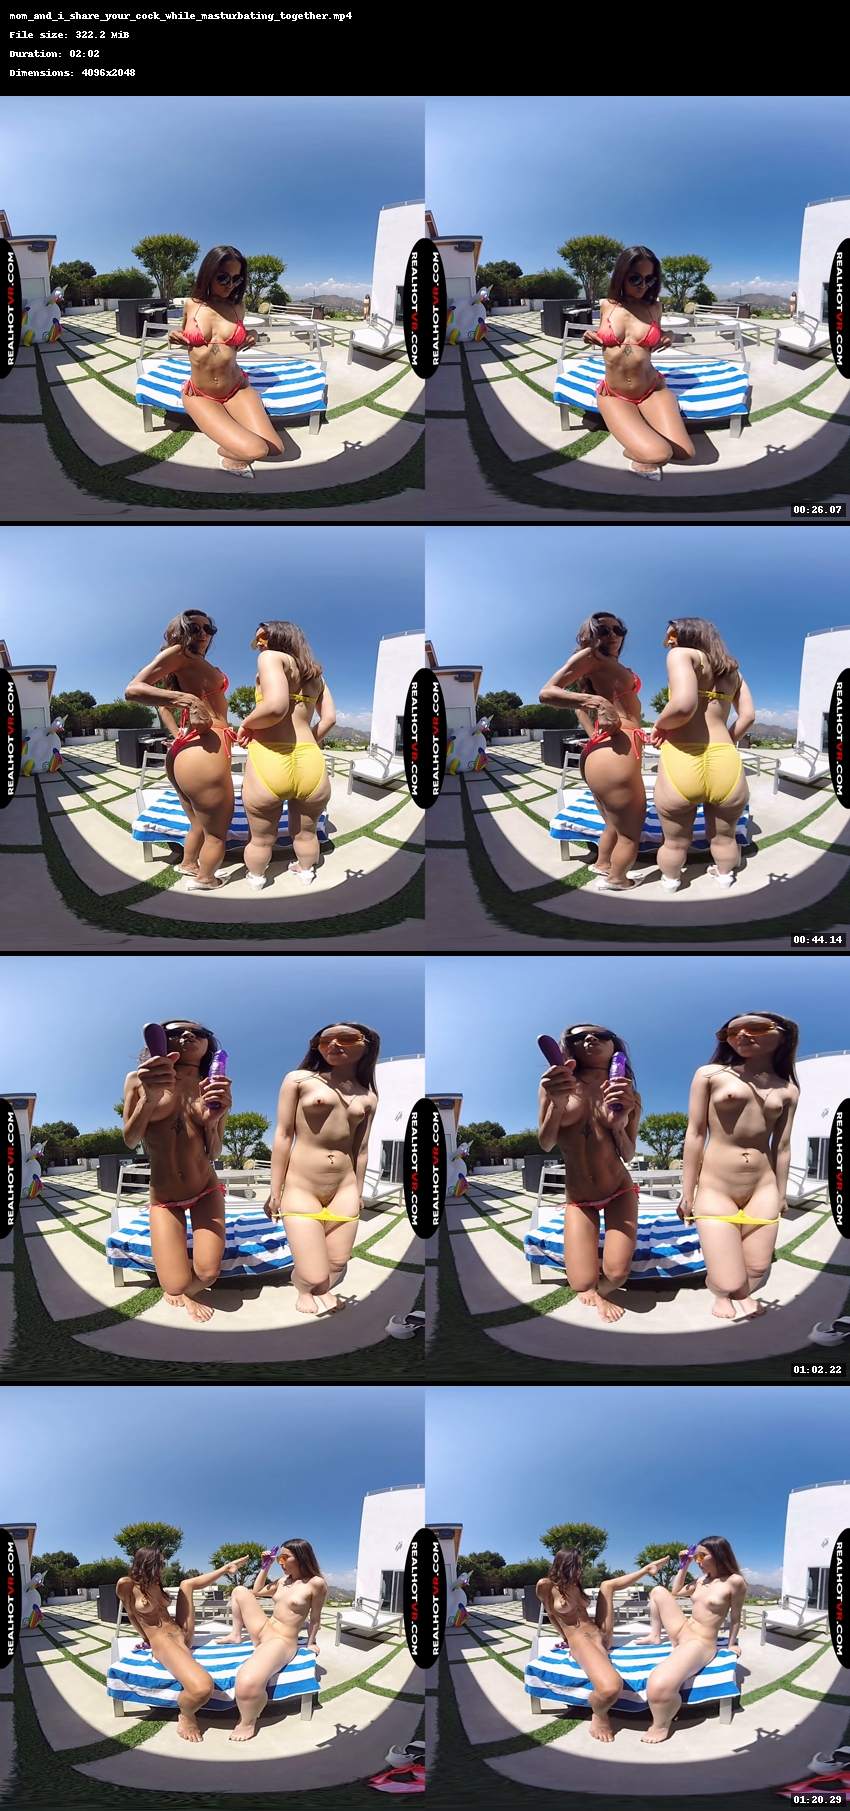 Abby Lee Brazil & Aria Lee share your cock - joi vr